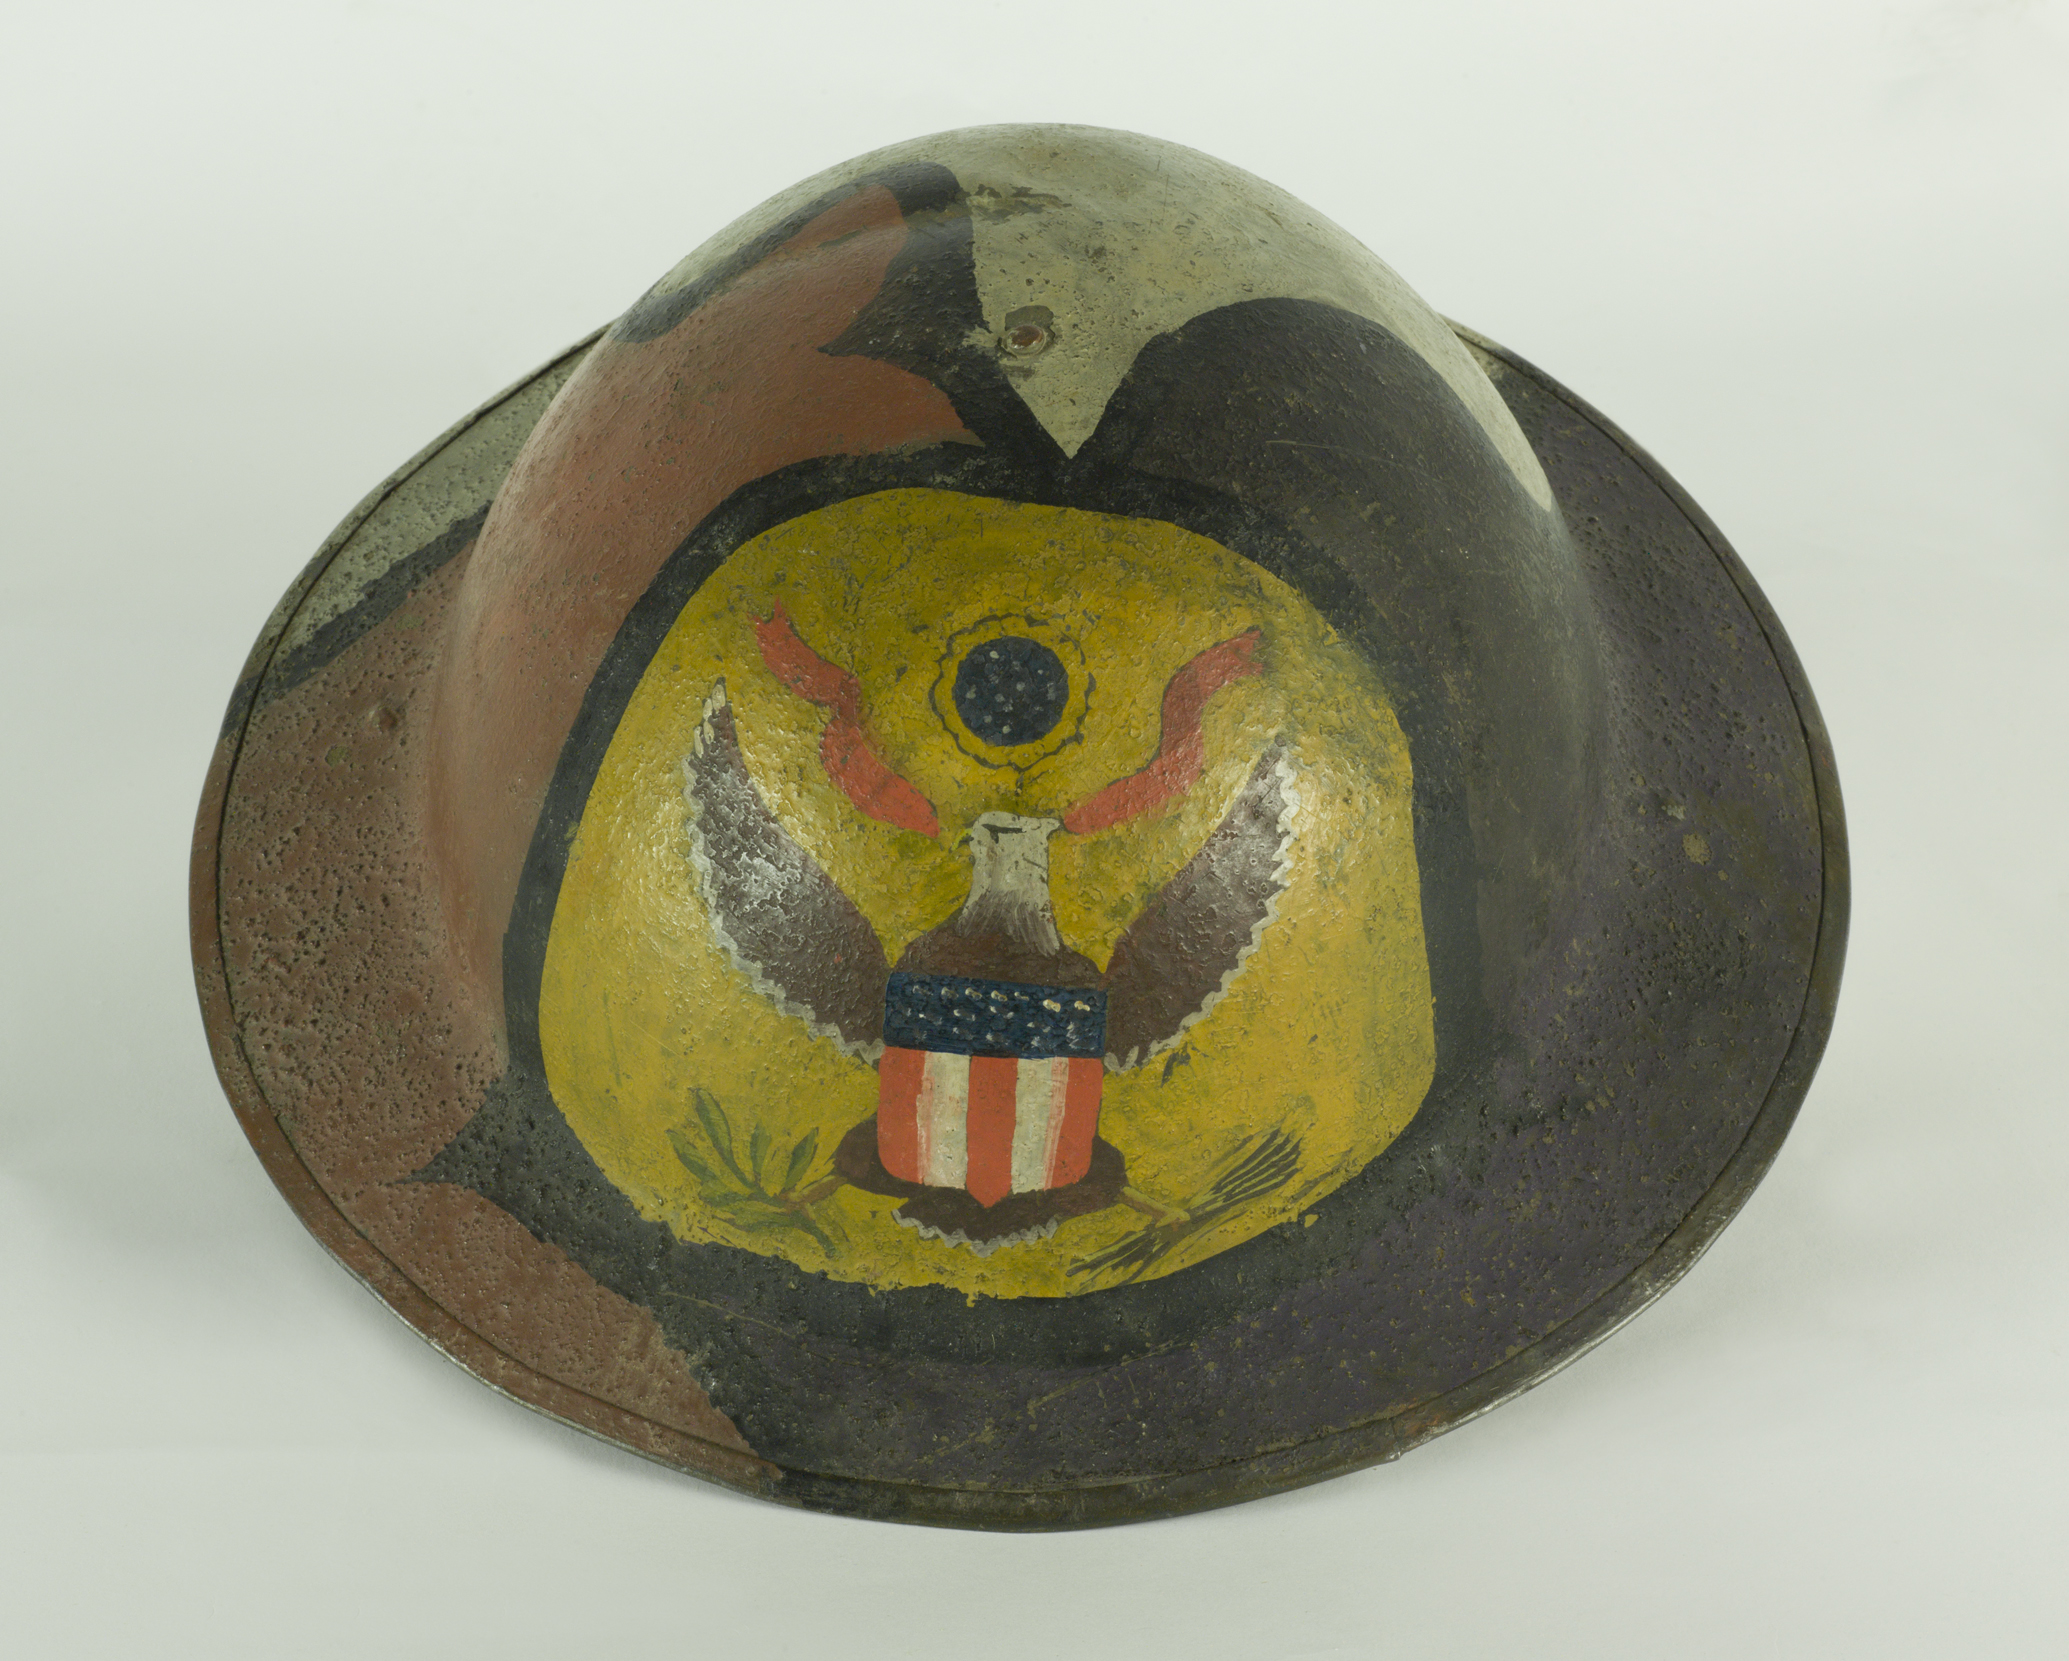 Photo of a Doughboy helmet from World War One. It is a round metal helmet painted with green, brown and black camouflage pattern on the outer surface. A heraldic eagle painted on a yellow background is hand painted on the forehead.